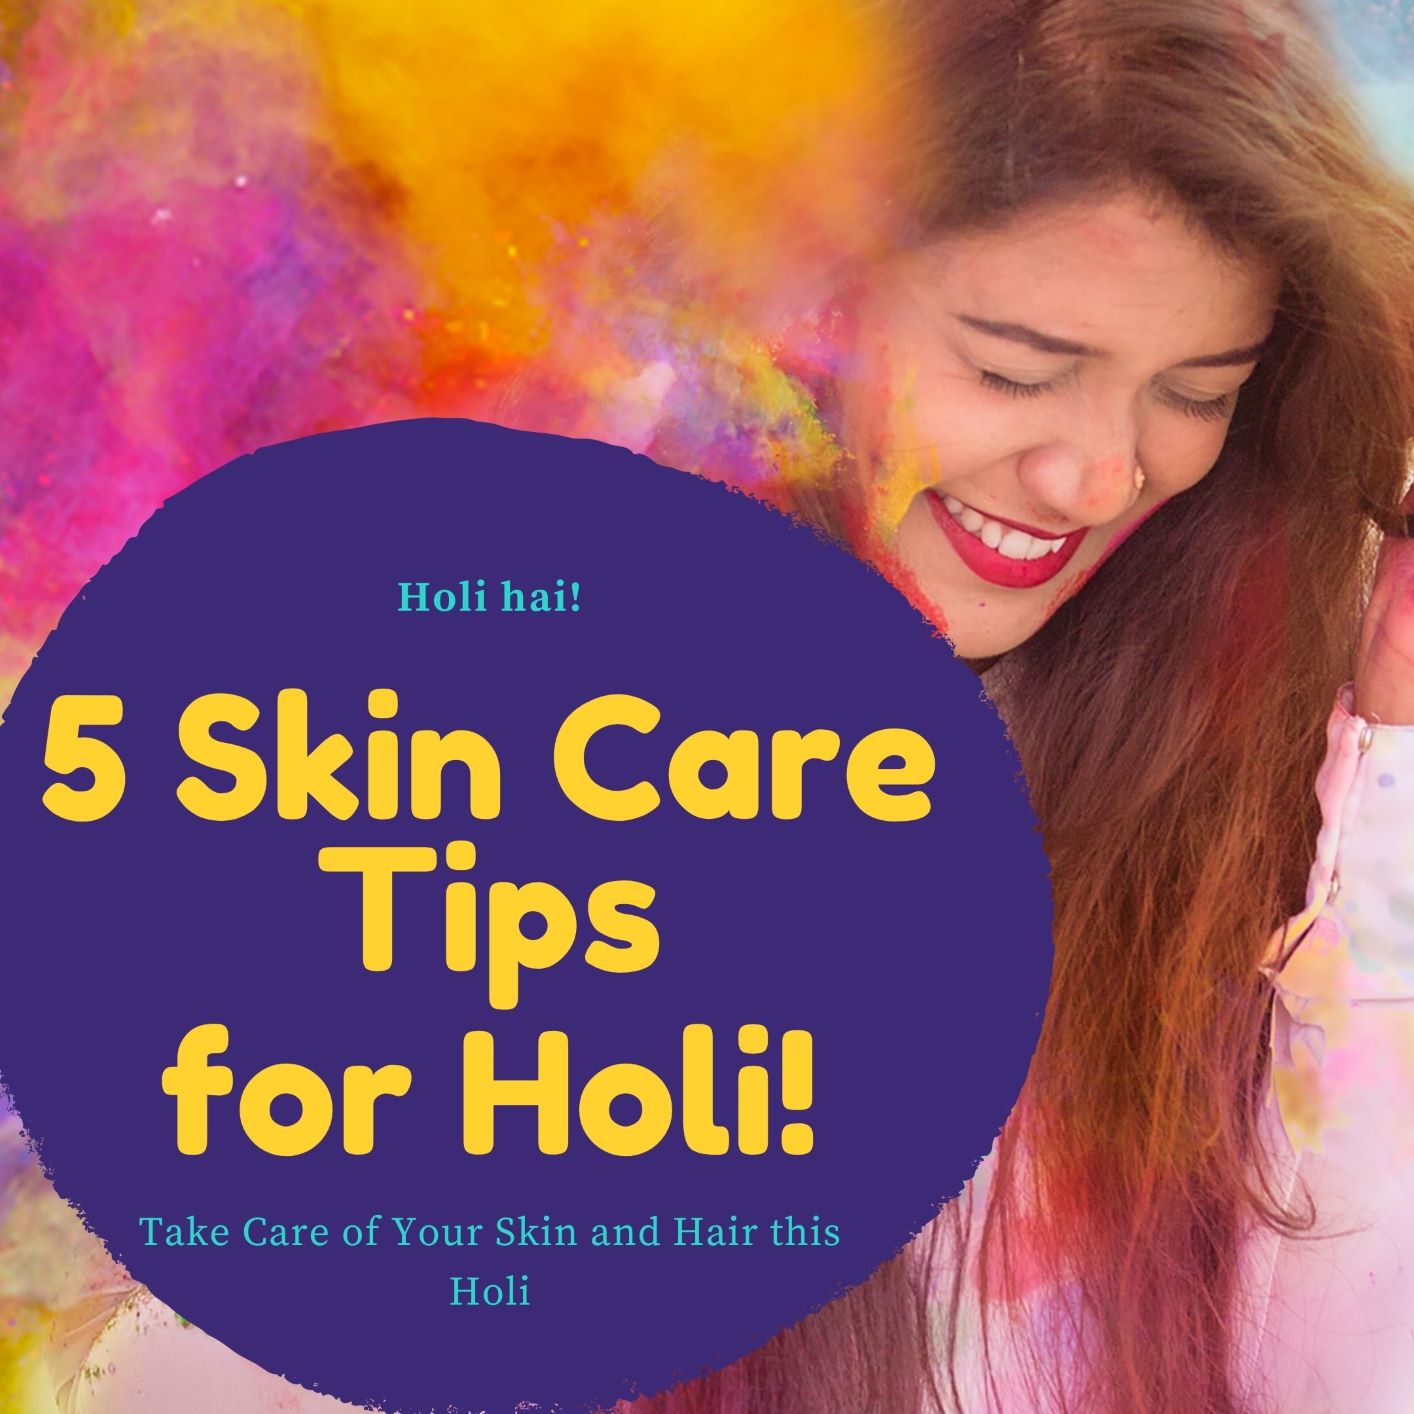 How to Take Care of Your Skin and Hair this Holi - Hair Care